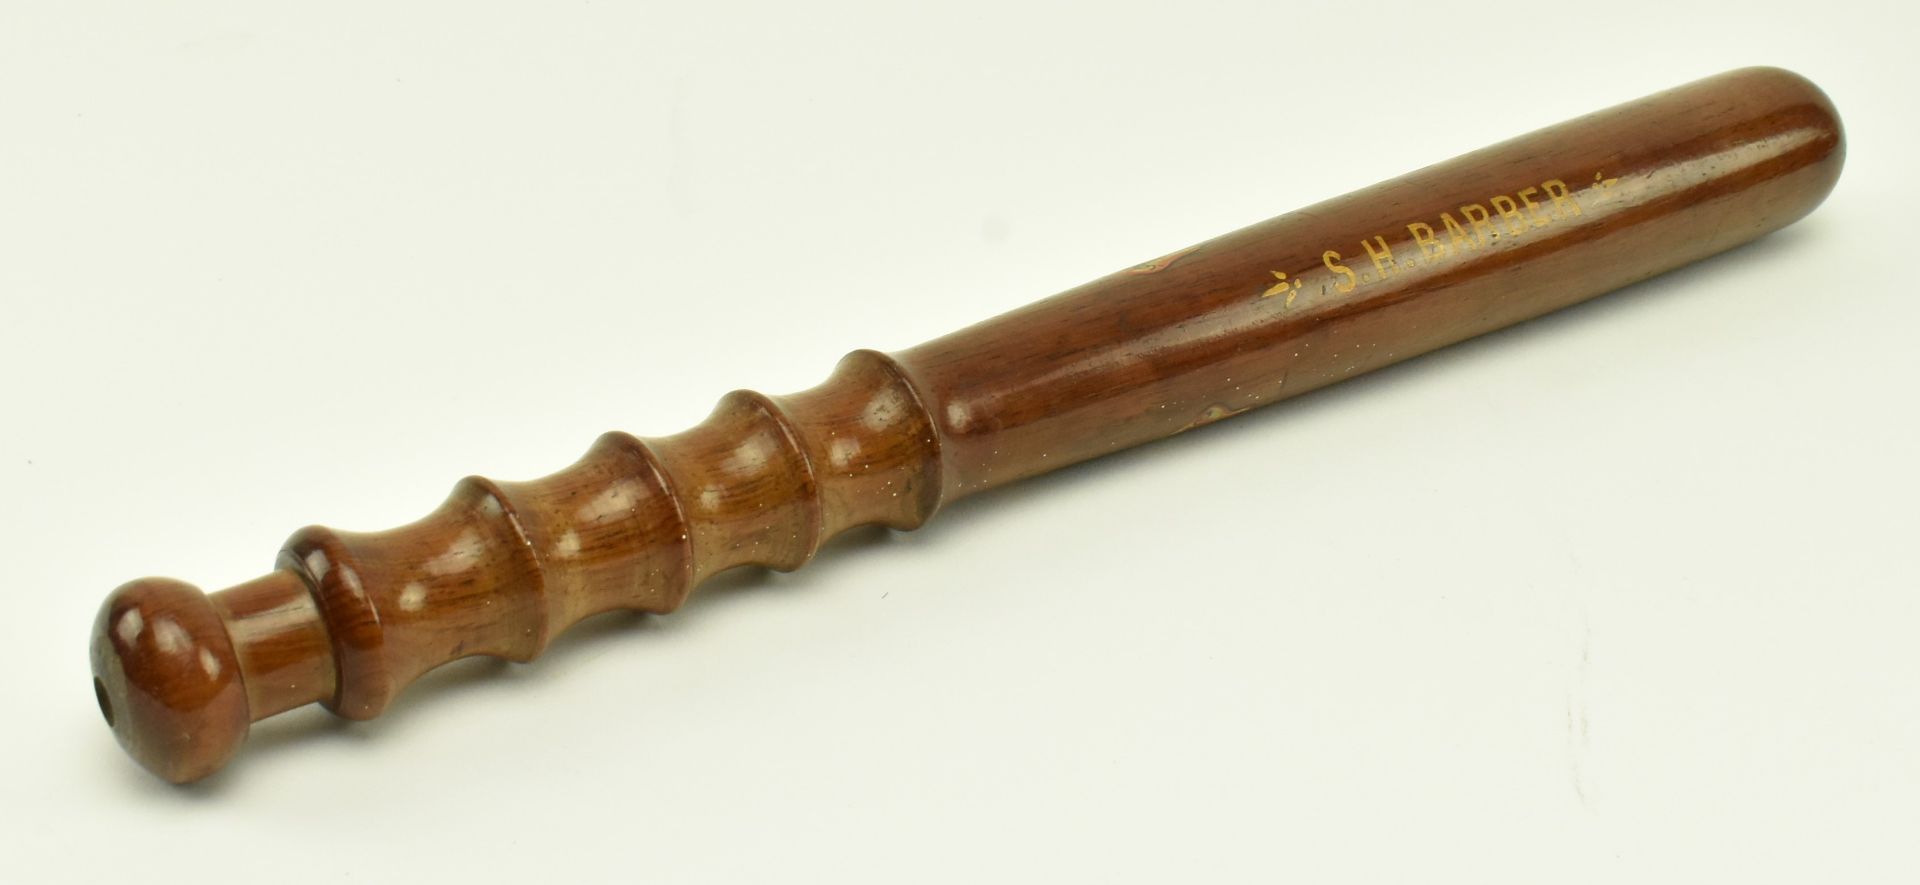 GEORGE V WOODEN SPECIAL CONSTABLE 1914-1919 TRUNCHEON - Image 6 of 6